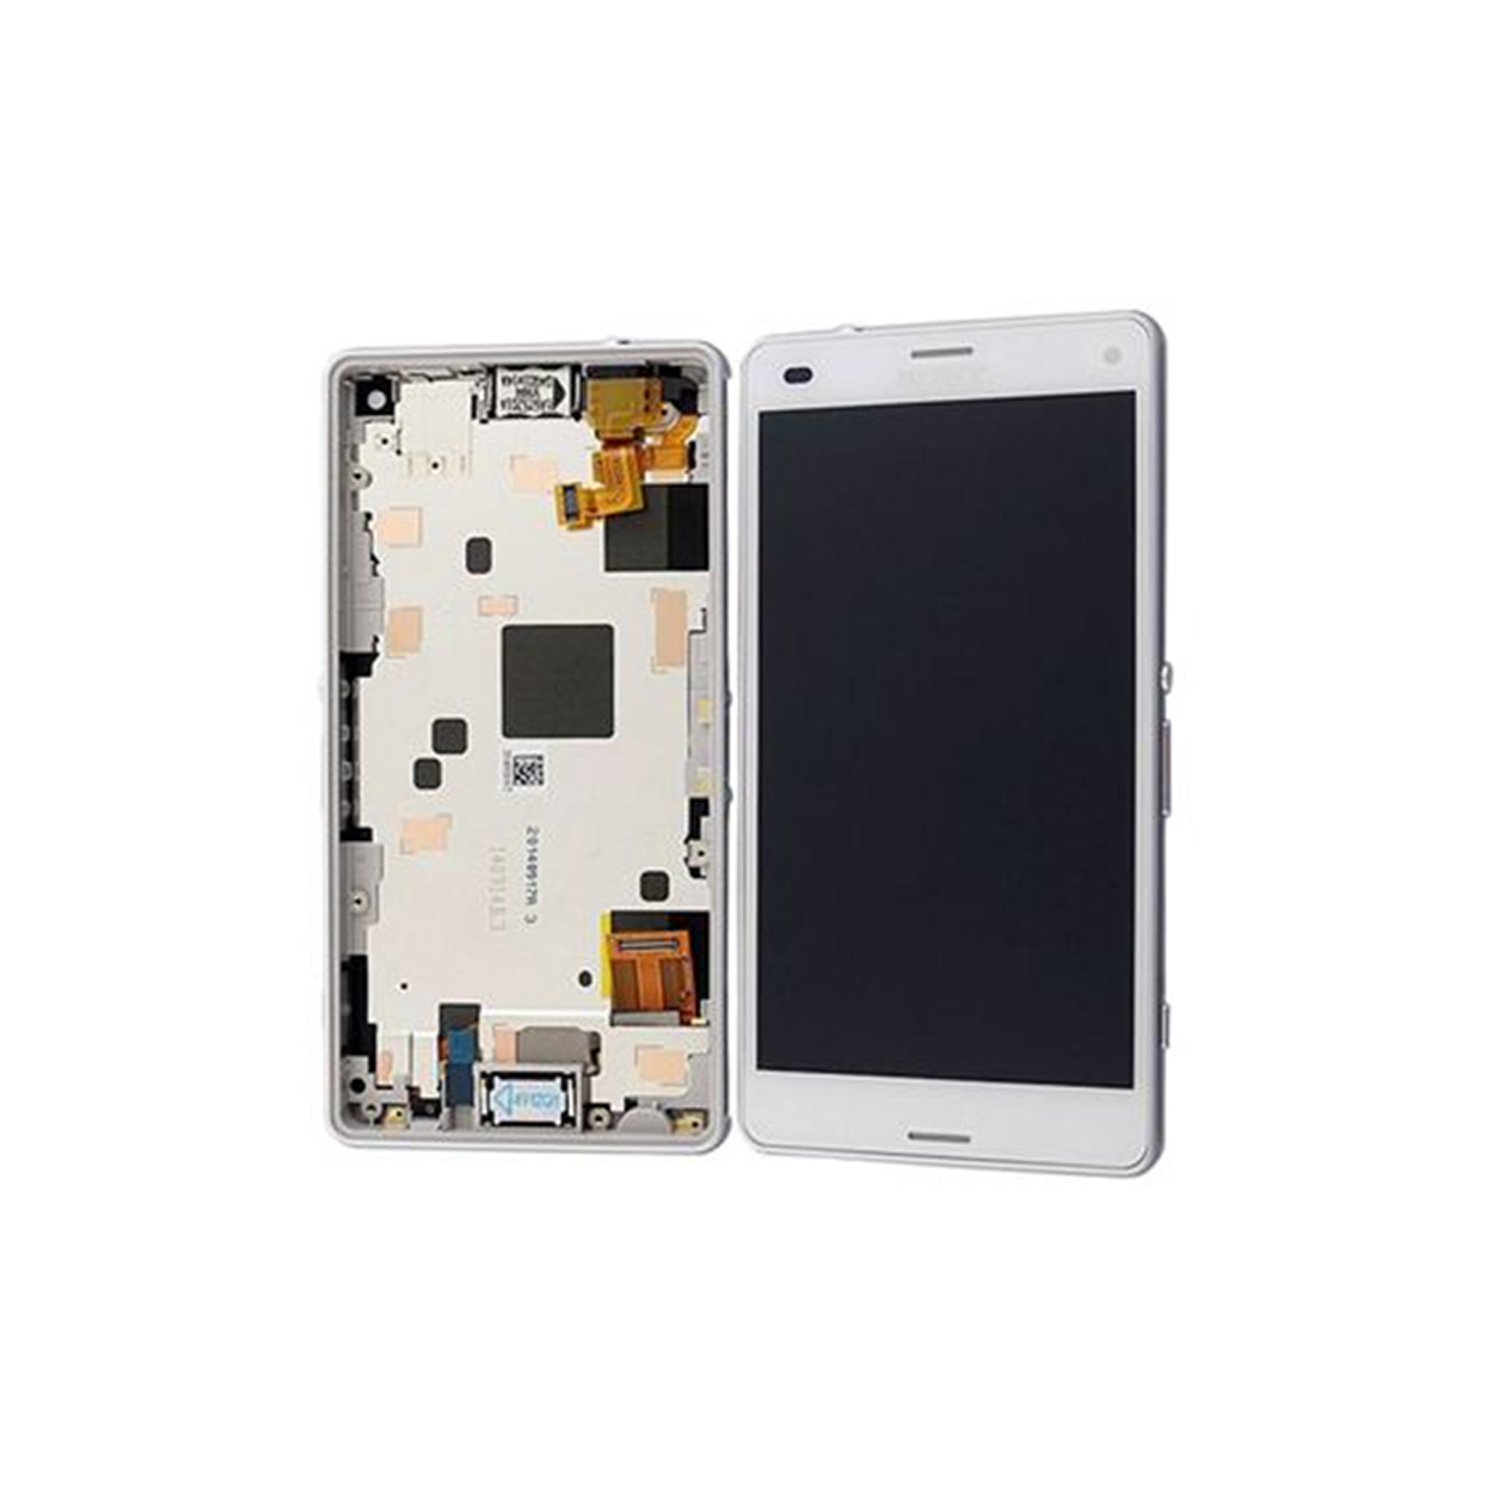 Replacement Part for Sony Xperia Z3 Compact LCD Screen and Digitizer Assembly with Front Housing - White